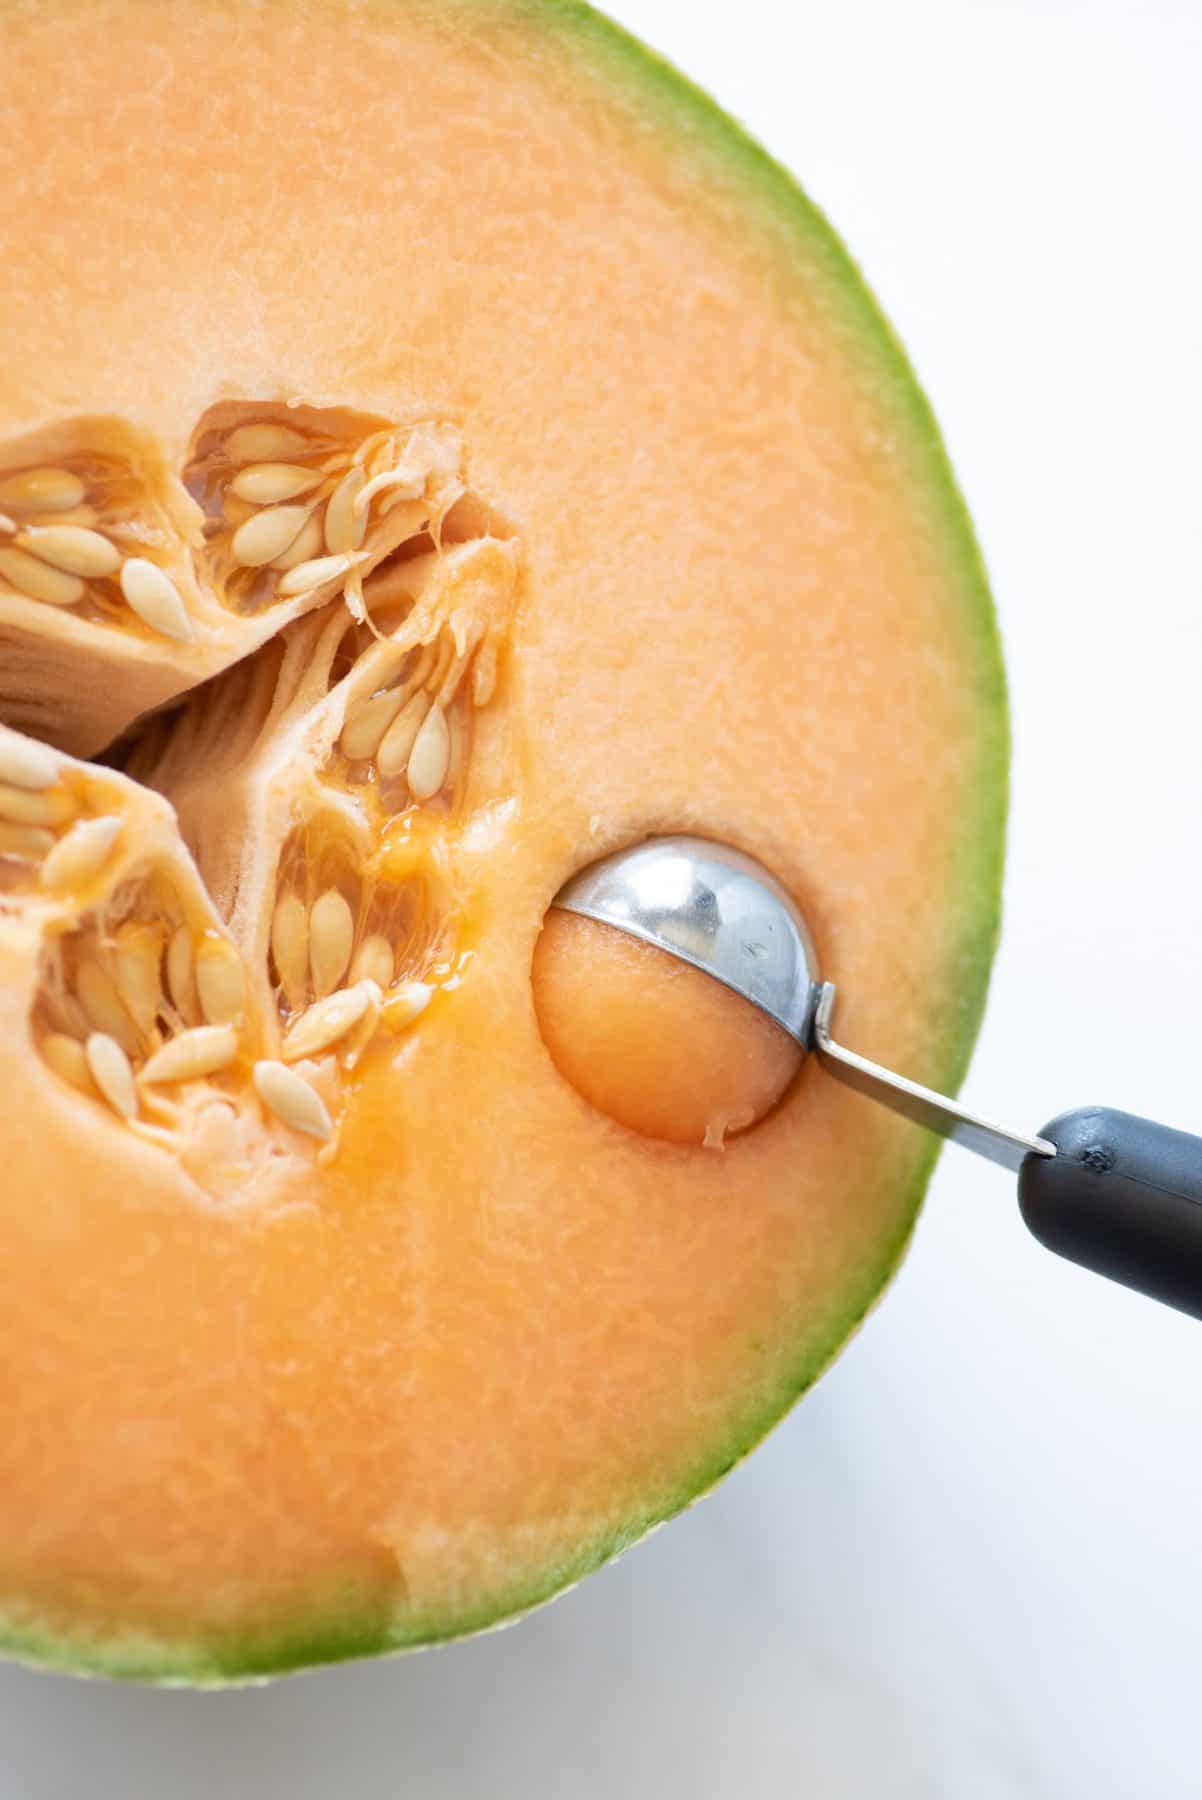 Close-up of melon baller scooping into the cut side of a cantaloupe half.